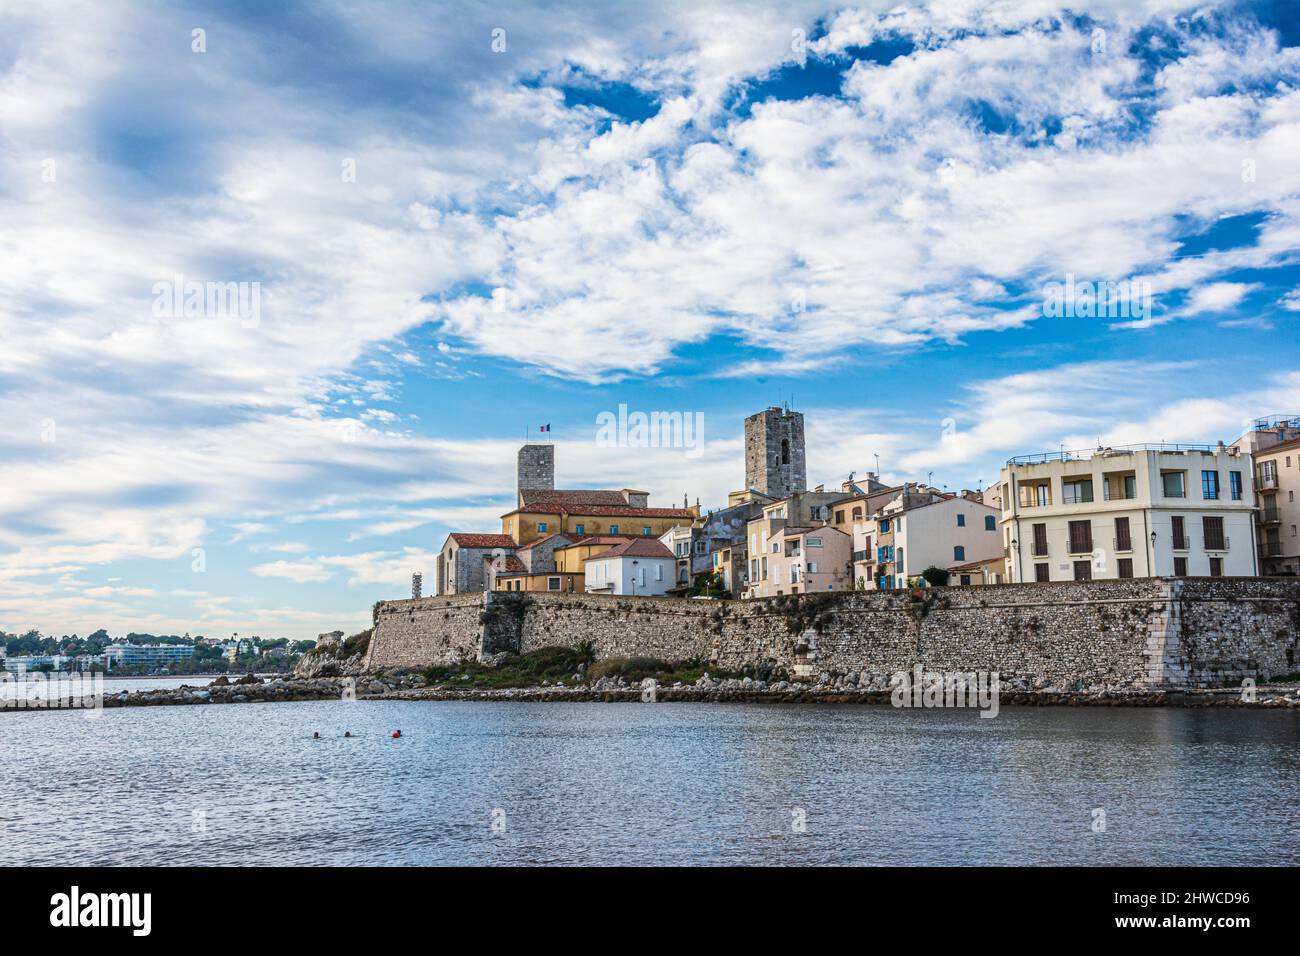 View of old city and the city walls from La Gravette beach, Antibes, France Stock Photo